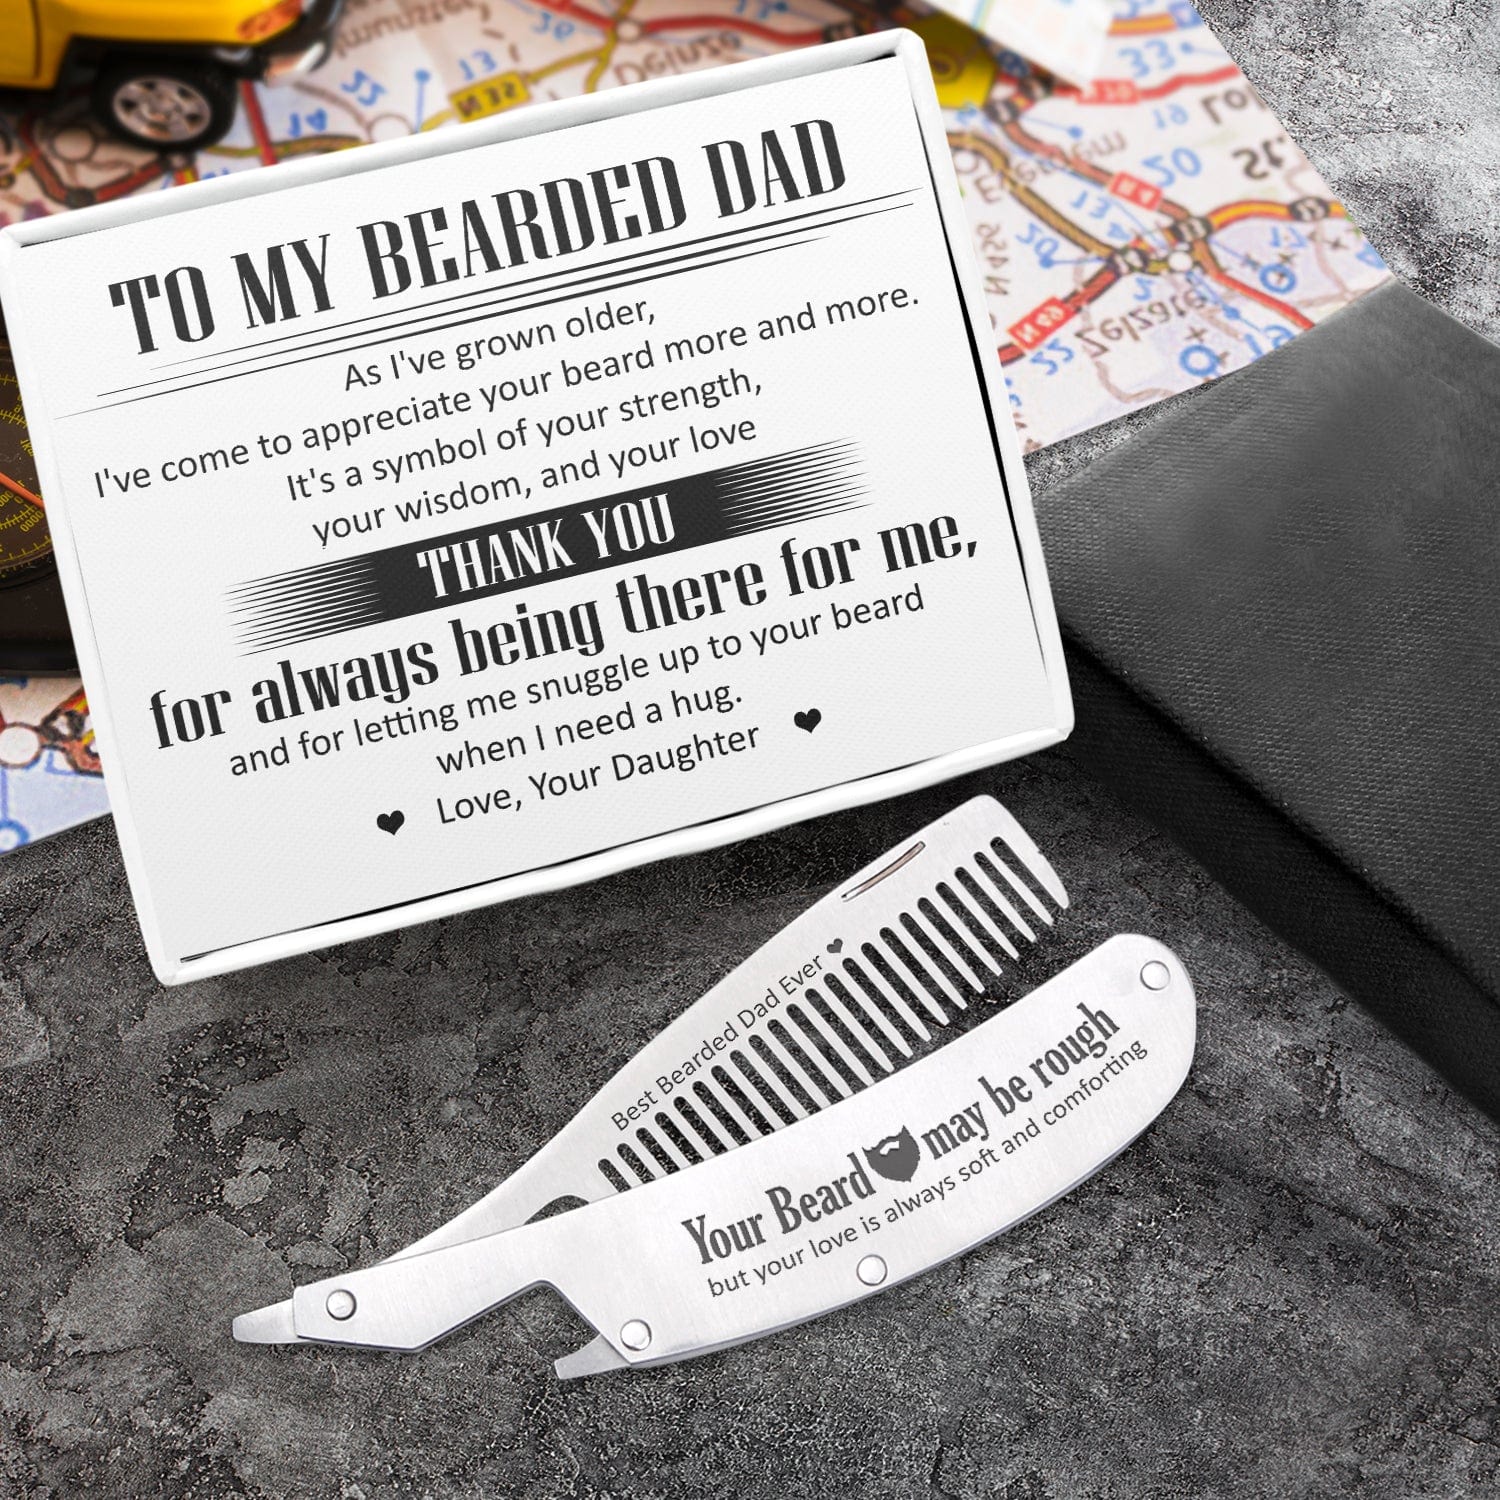 Folding Comb - Beard - To My Bearded Dad - Thank You For Always Being There For Me - Gec18053